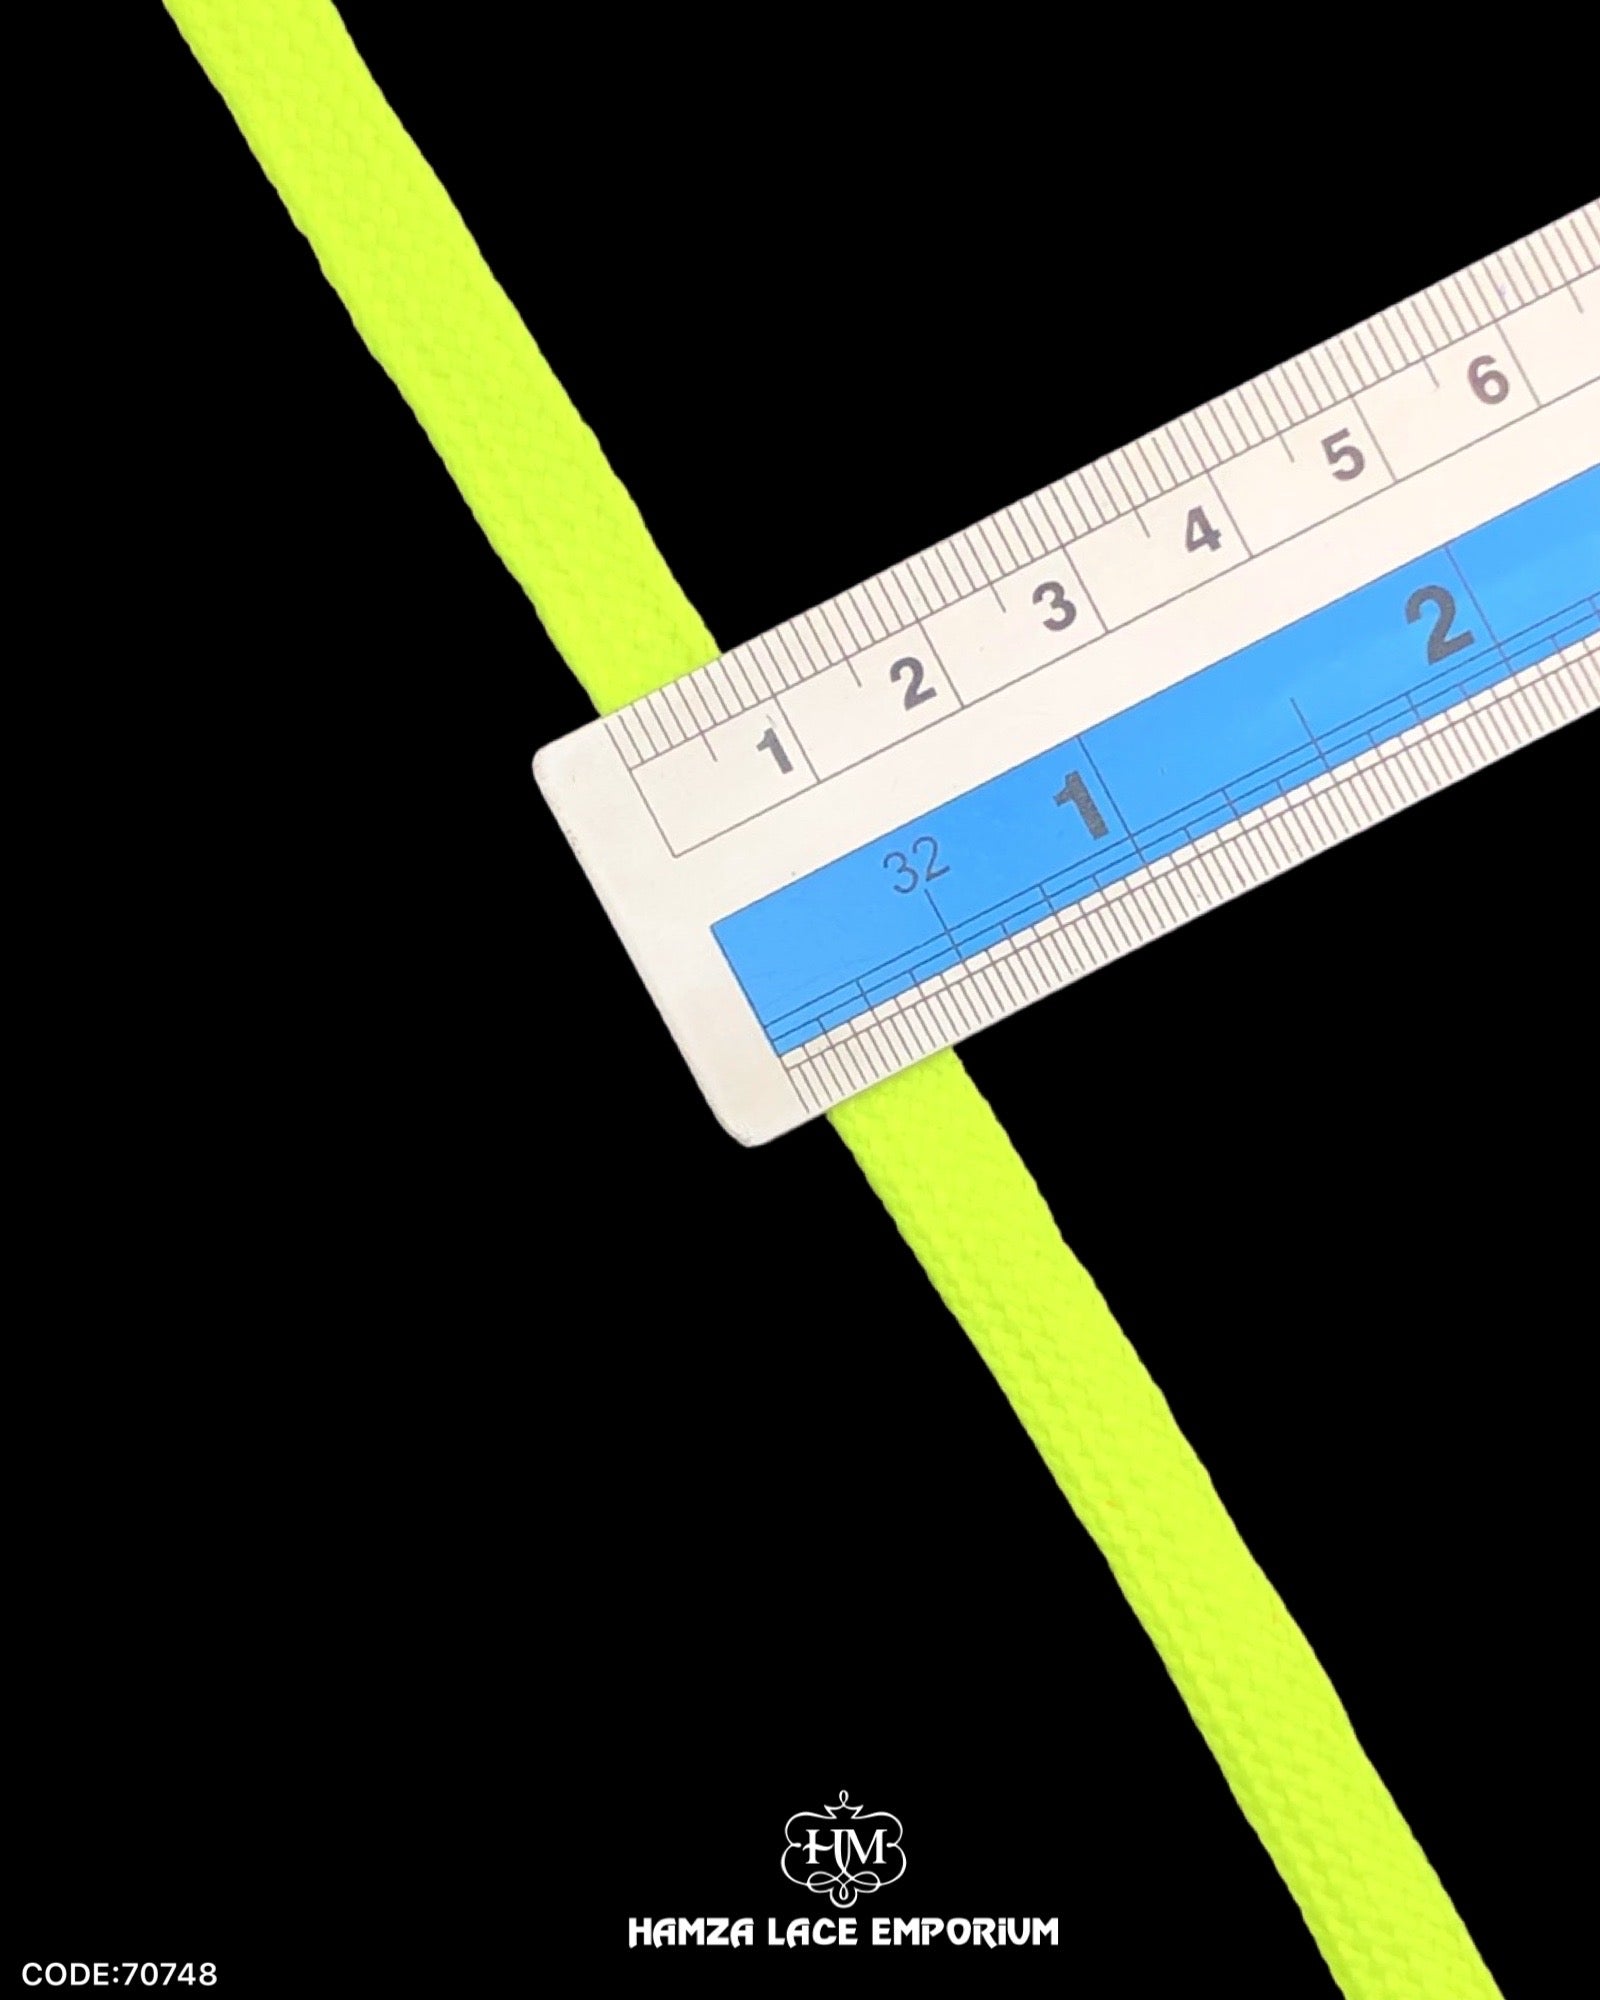 Size of the 'Center Filling Dori 70748' is displayed with the help of a ruler